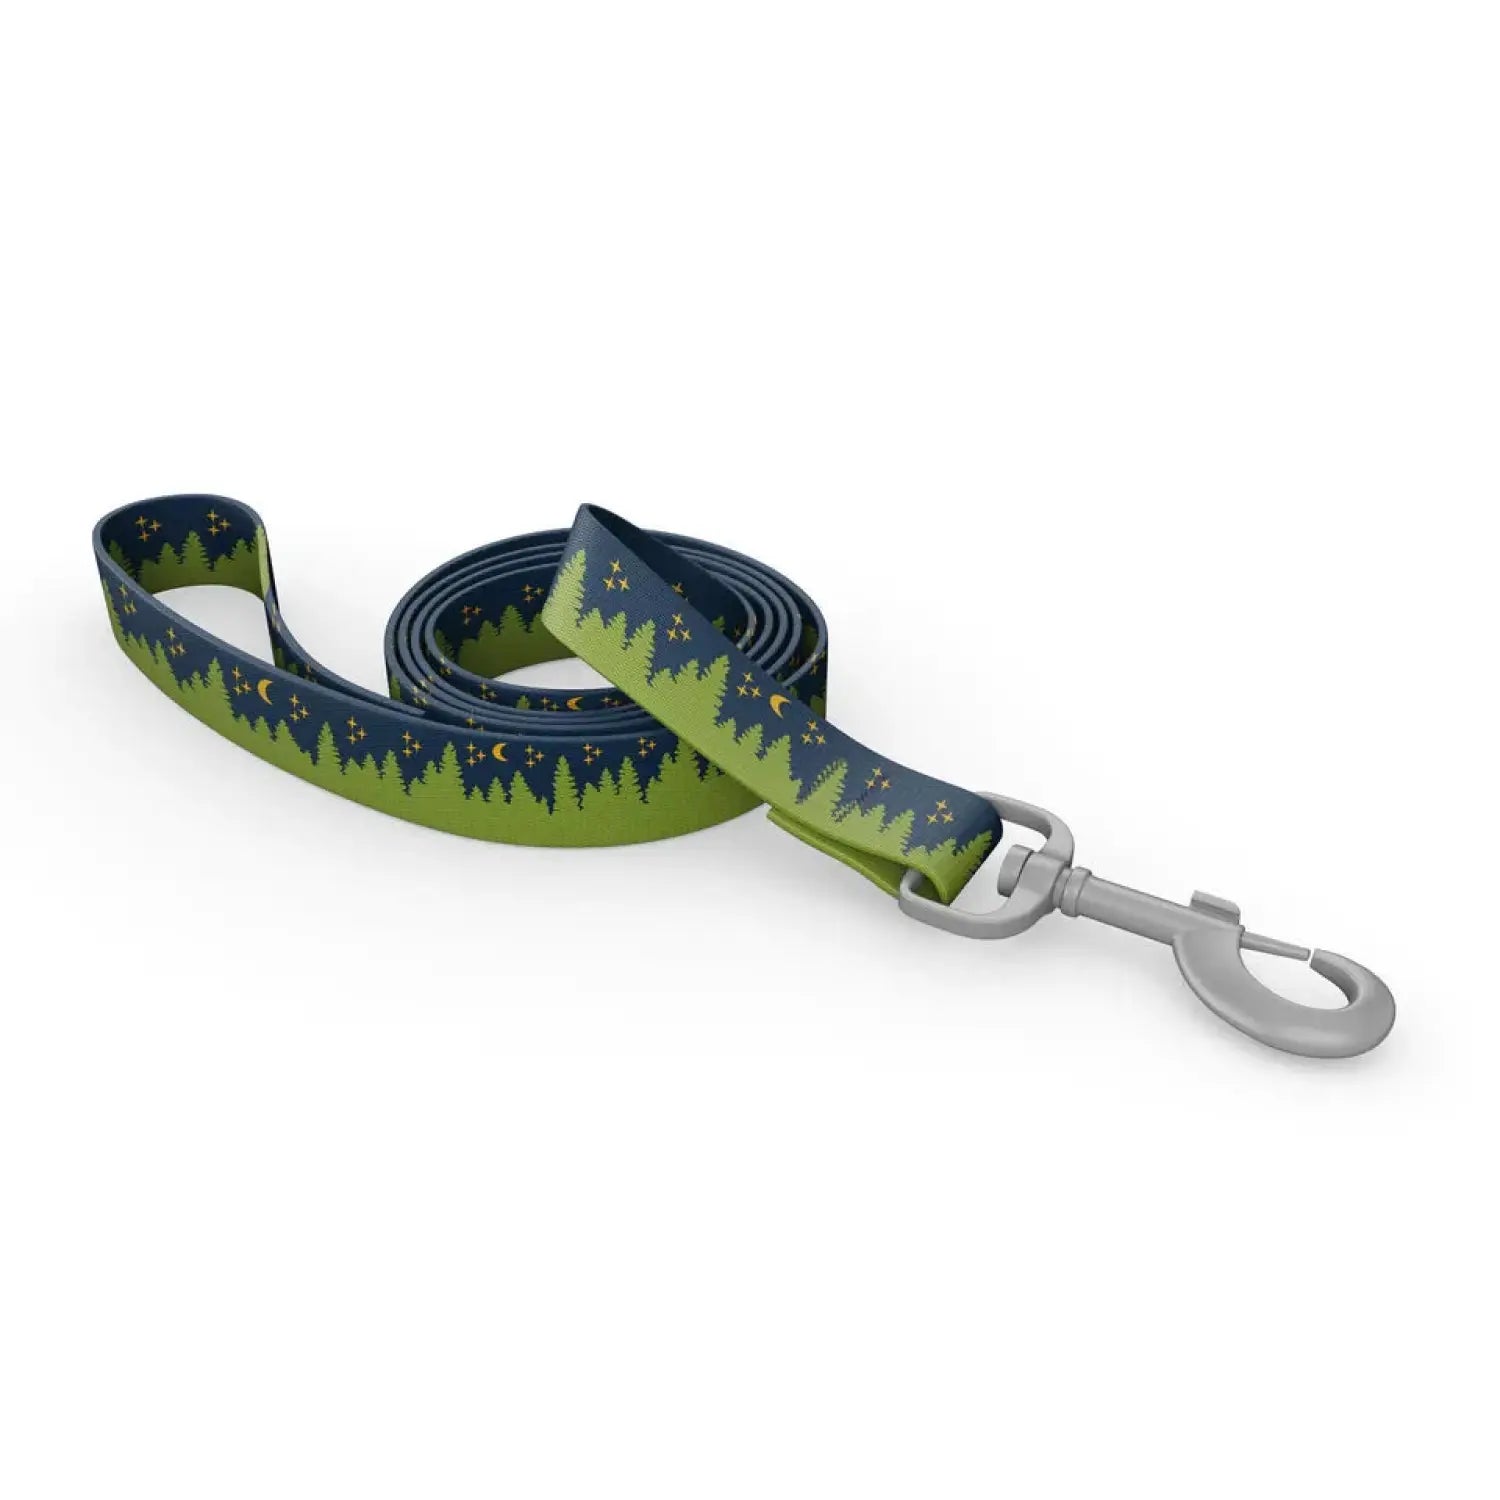 Wingo Outdoors Dog Leash in Under the Stars design, with green trees and dark blue sky with yellow stars.